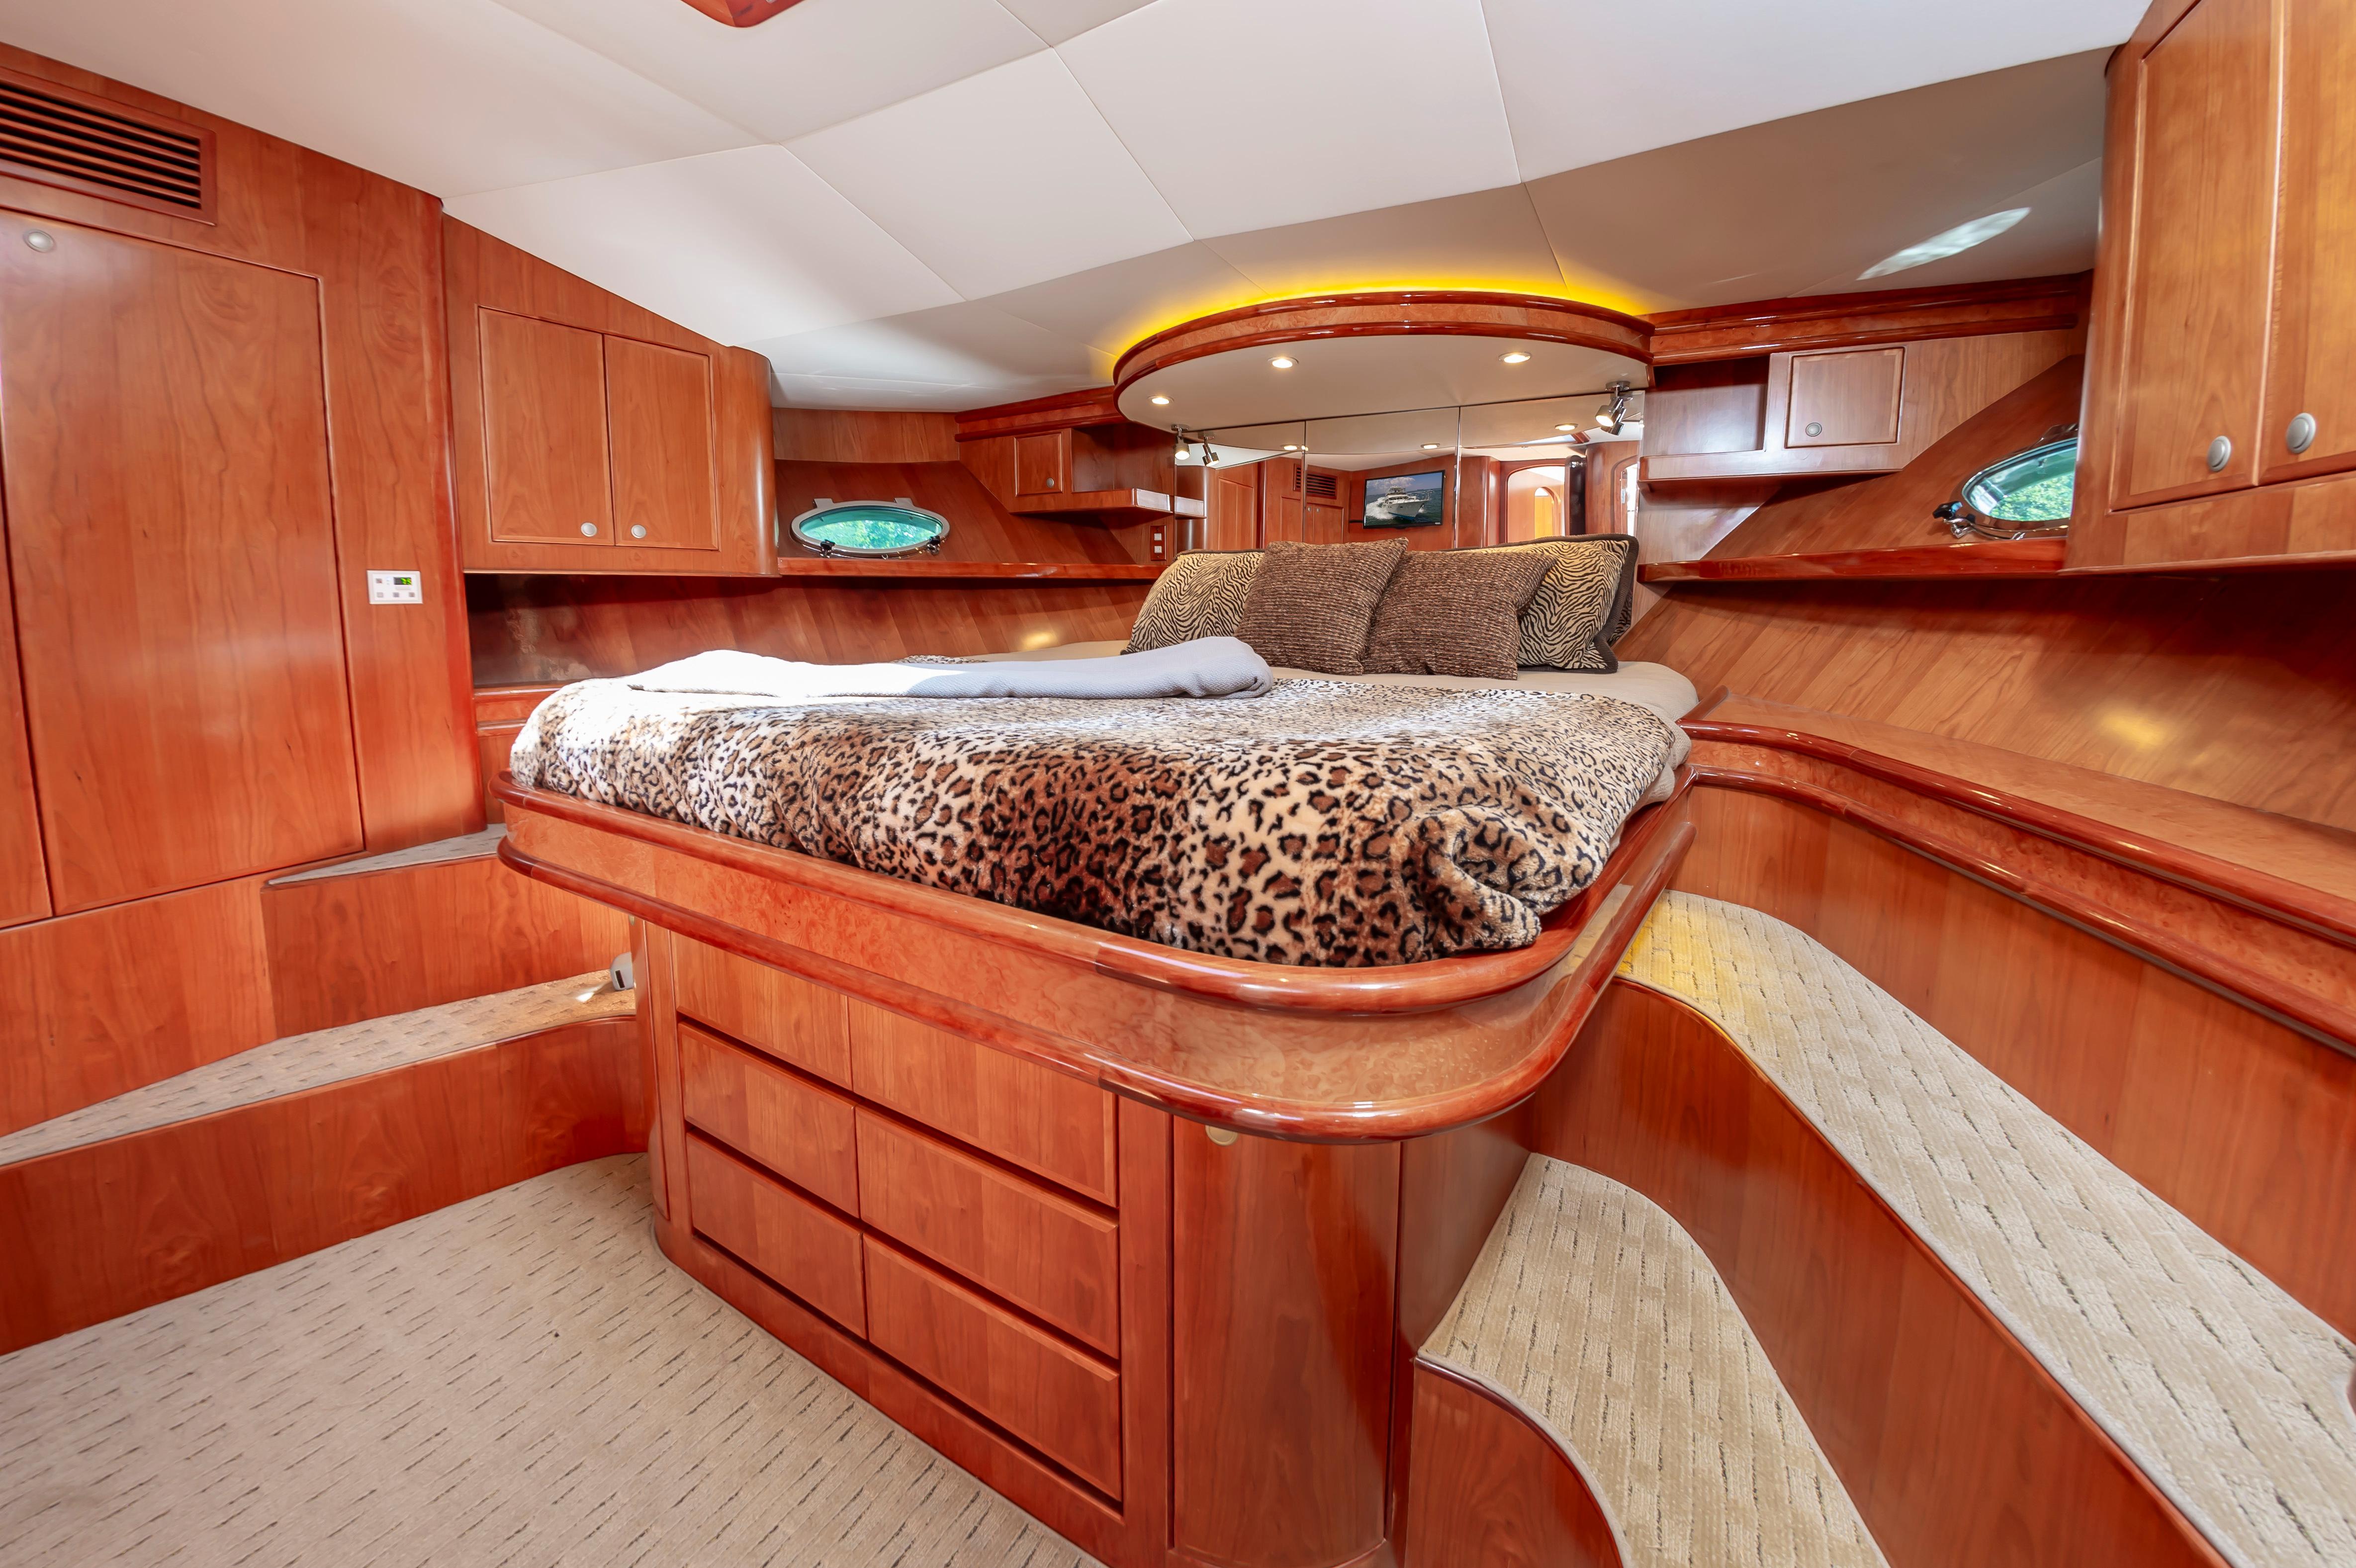 2016 Mikelson 50' S/F, Master Stateroom picture 3